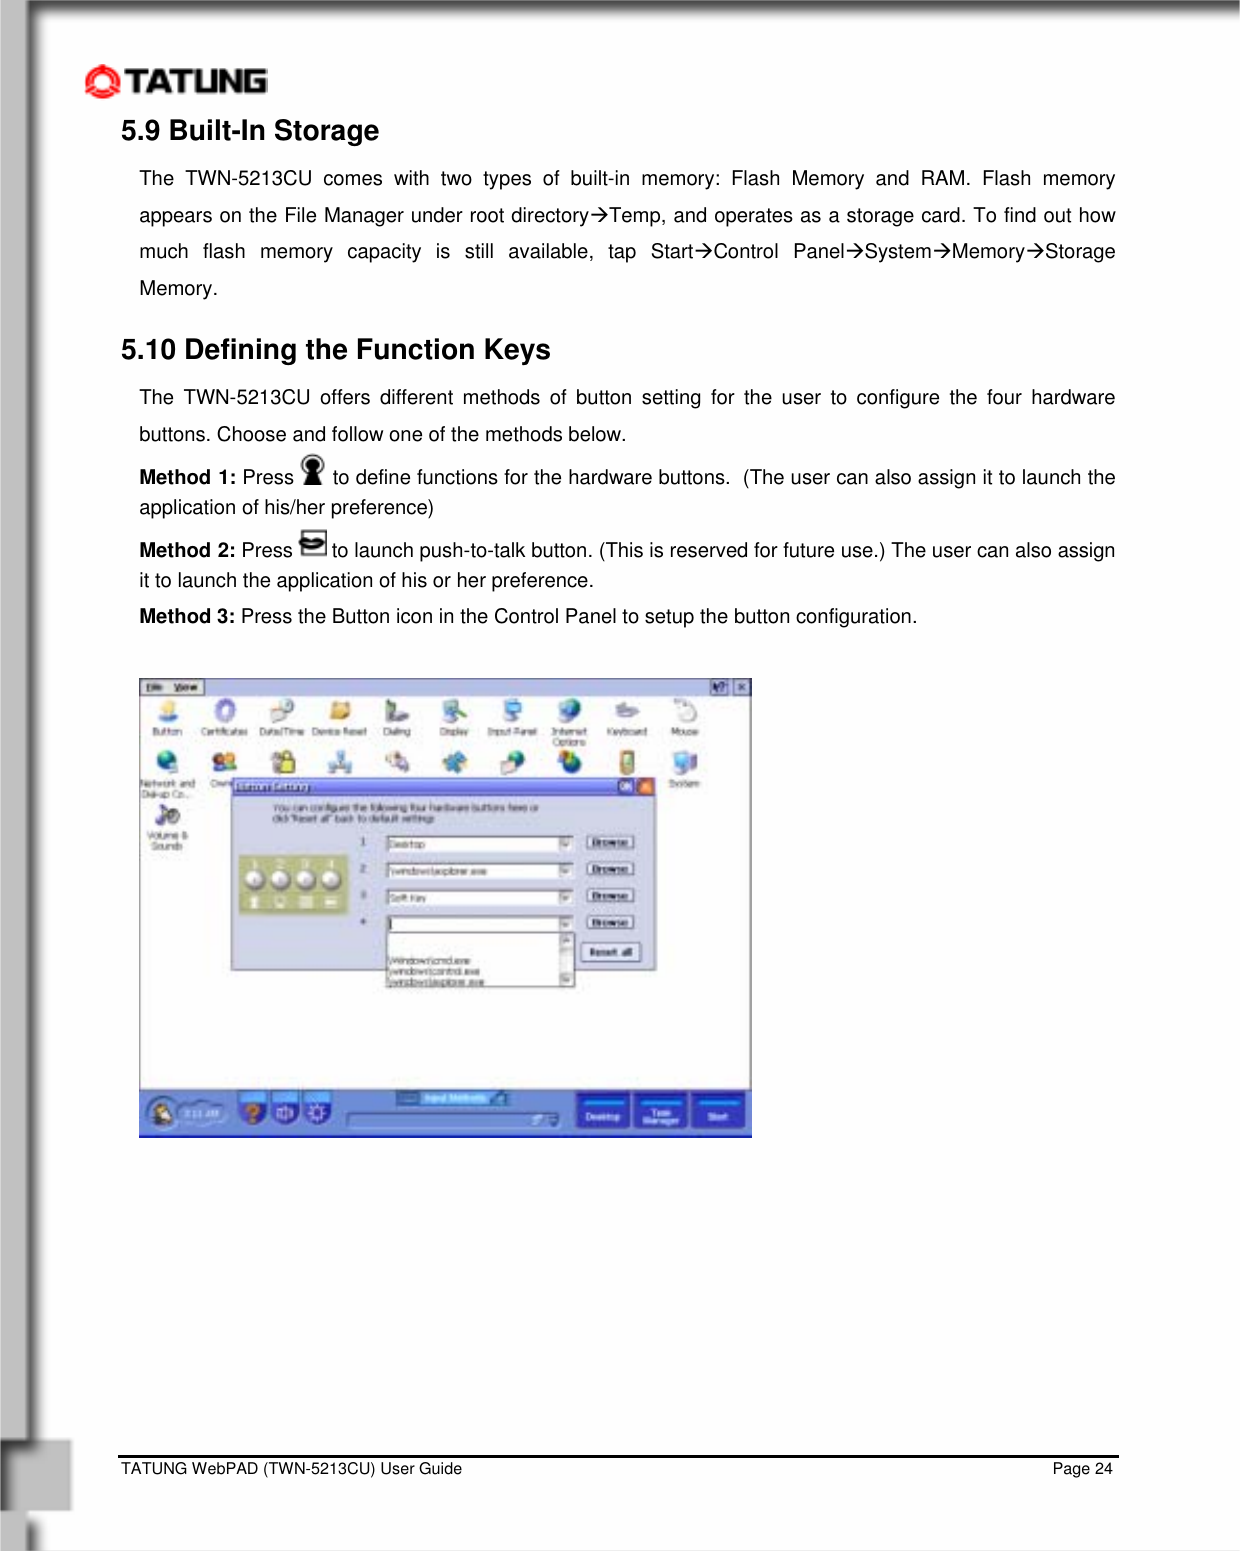    TATUNG WebPAD (TWN-5213CU) User Guide                                                                                                                                   Page 24 5.9 Built-In Storage The TWN-5213CU comes with two types of built-in memory: Flash Memory and RAM. Flash memory appears on the File Manager under root directoryÆTemp, and operates as a storage card. To find out how much flash memory capacity is still available, tap StartÆControl PanelÆSystemÆMemoryÆStorage Memory. 5.10 Defining the Function Keys The TWN-5213CU offers different methods of button setting for the user to configure the four hardware buttons. Choose and follow one of the methods below. Method 1: Press   to define functions for the hardware buttons.  (The user can also assign it to launch the application of his/her preference) Method 2: Press   to launch push-to-talk button. (This is reserved for future use.) The user can also assign it to launch the application of his or her preference. Method 3: Press the Button icon in the Control Panel to setup the button configuration.           